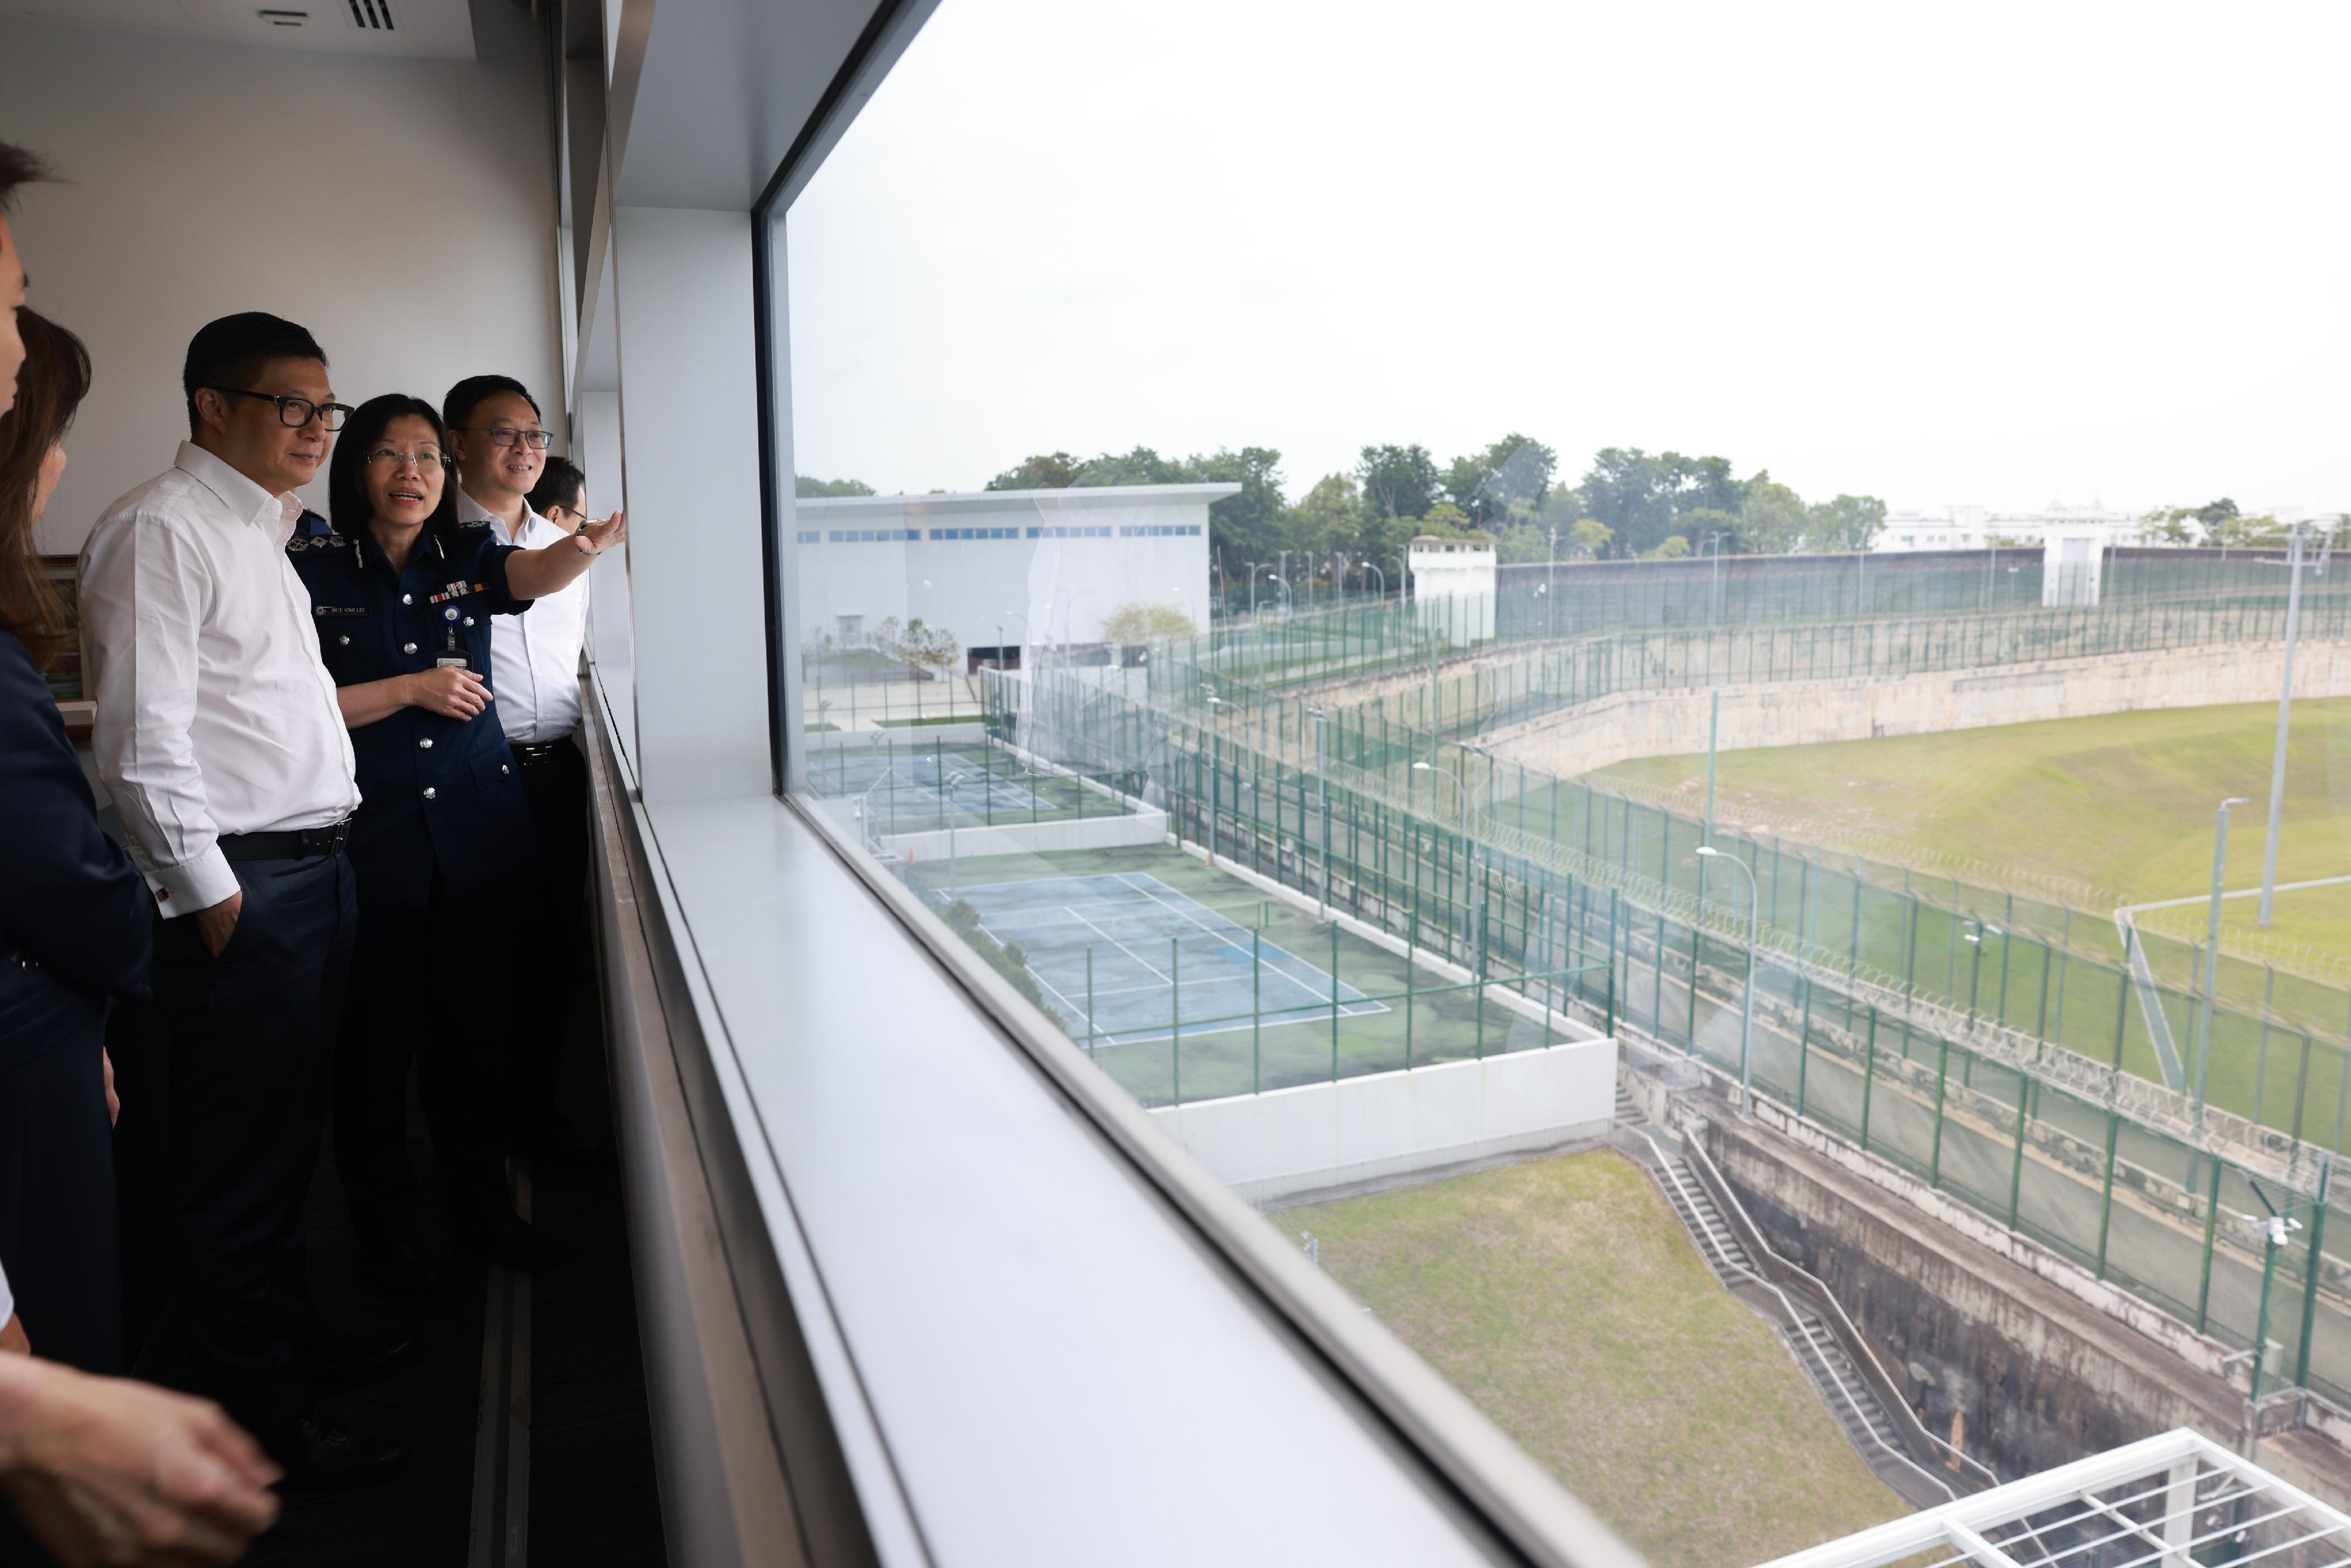 The Secretary for Security, Mr Tang Ping-keung, continued his visit programme to Singapore today (August 31). Photo shows Mr Tang (left) and the Commissioner of Correctional Services, Mr Wong Kwok-hing (right), visiting the Changi Prison Complex in the company of the Commissioner of Prisons, Ms Shie Yong Lee (centre).